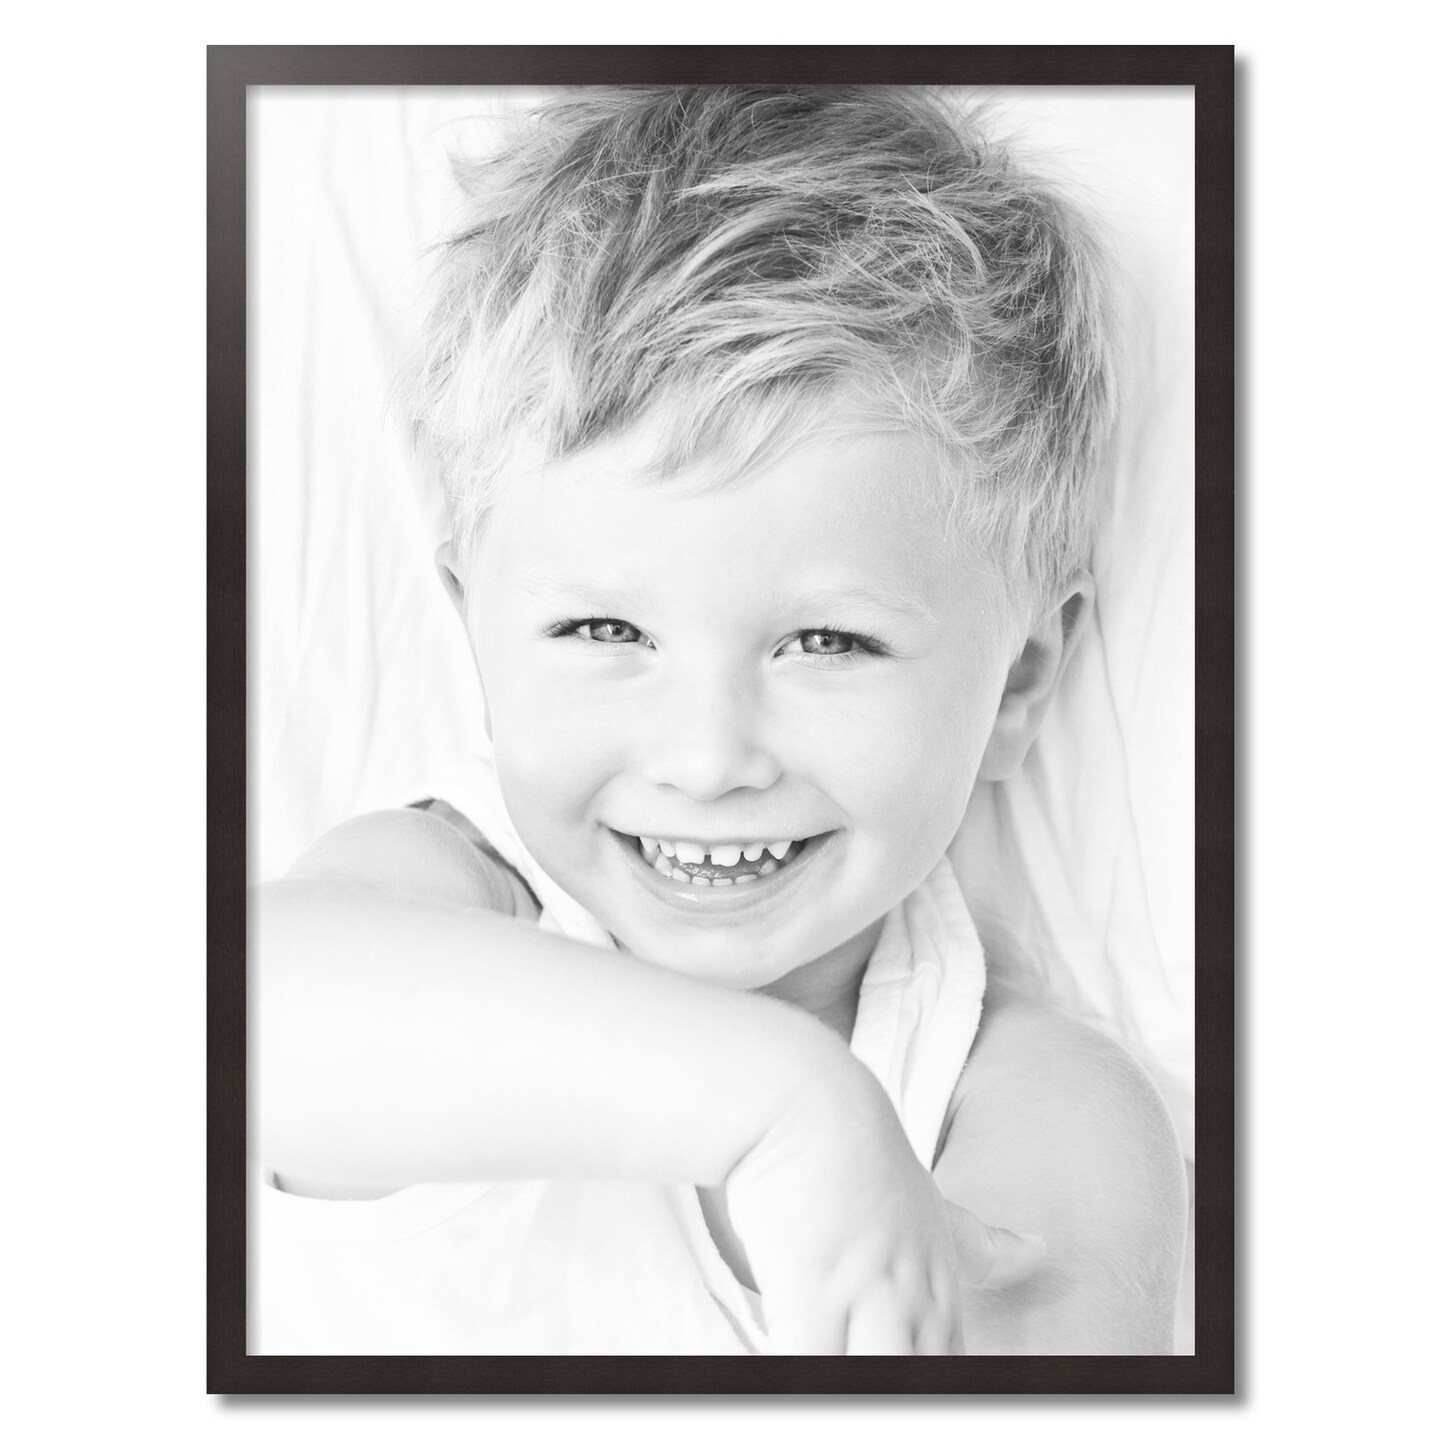  ArtToFrames 30x40 Inch Black Picture Frame, This 1.25